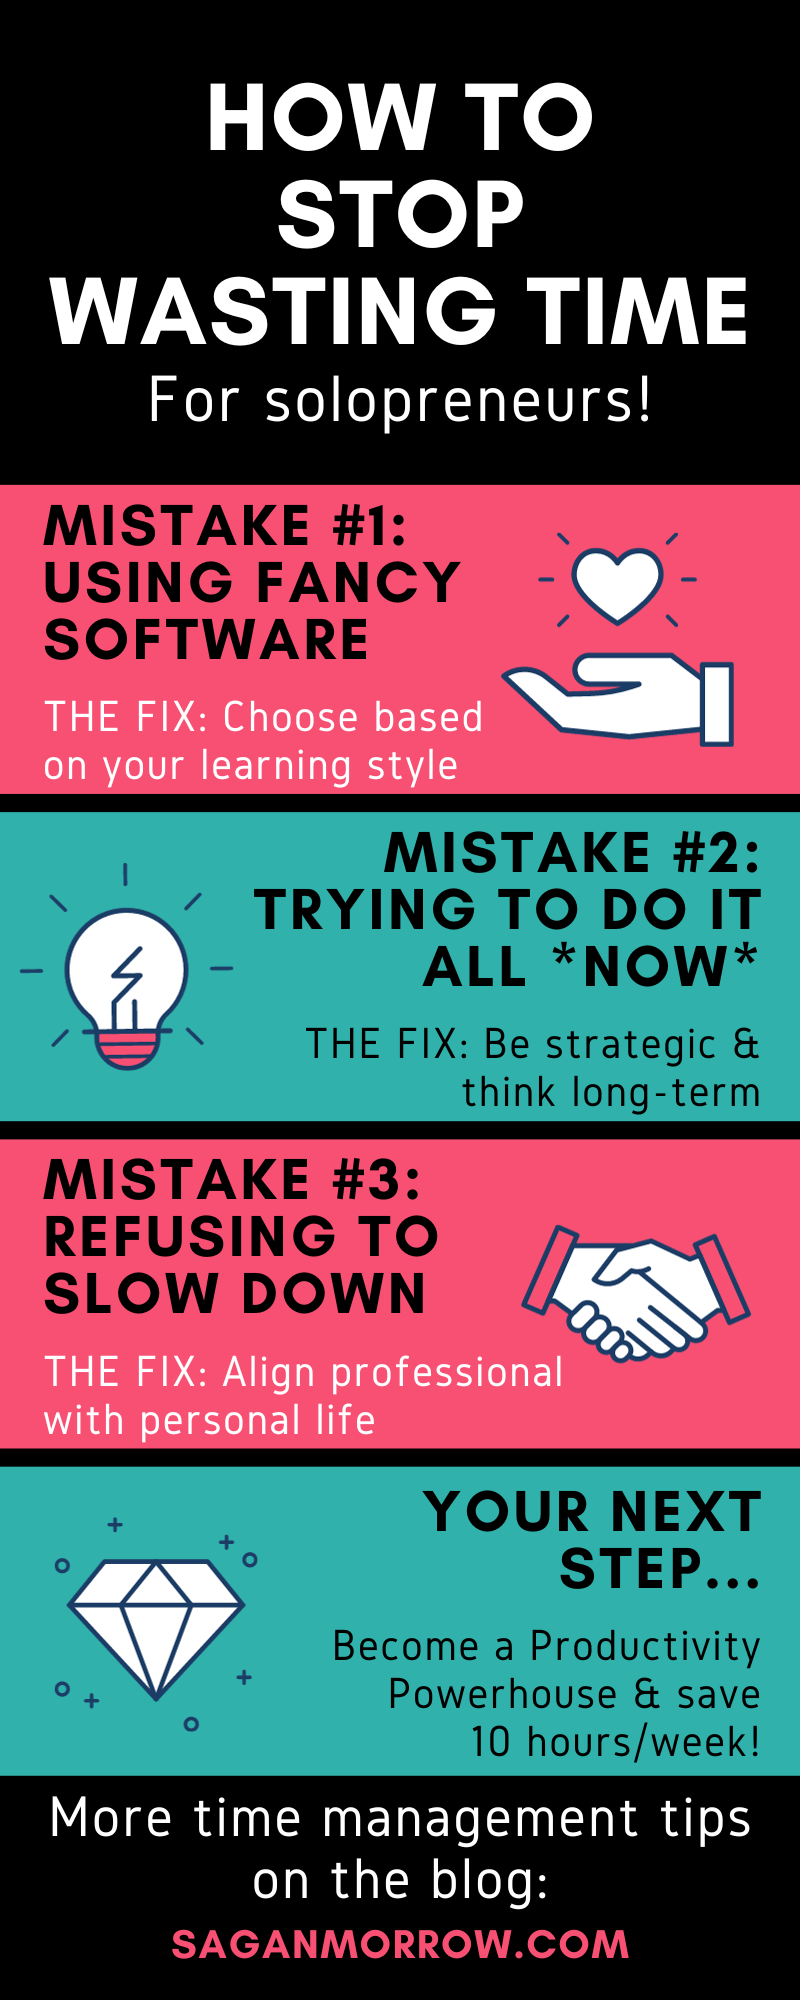 how to stop wasting time and get things done for freelancers infographic - work smarter not harder!